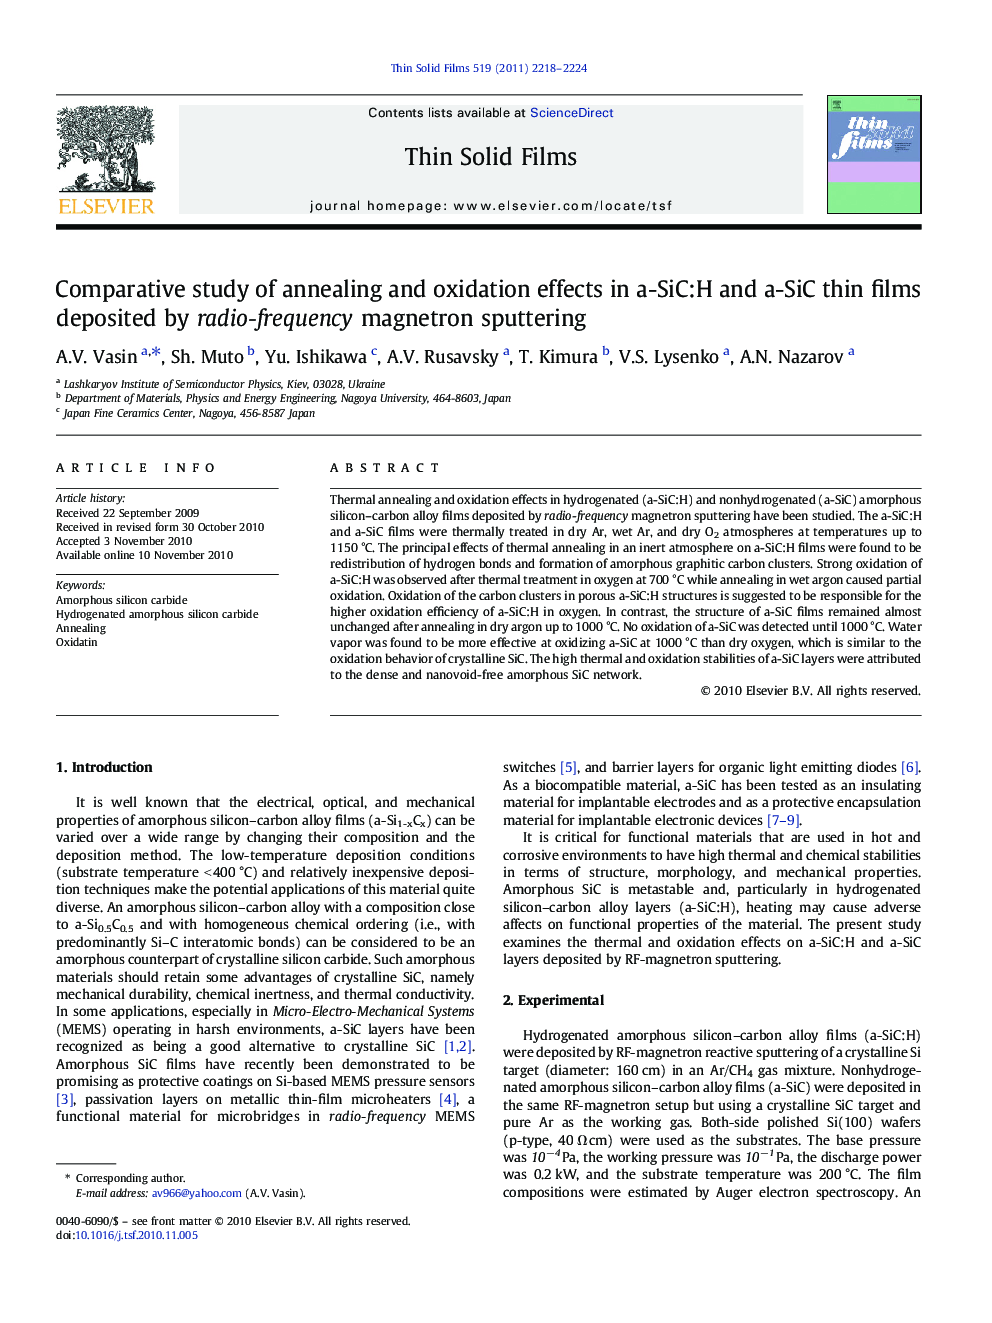 Comparative study of annealing and oxidation effects in a-SiC:H and a-SiC thin films deposited by radio-frequency magnetron sputtering